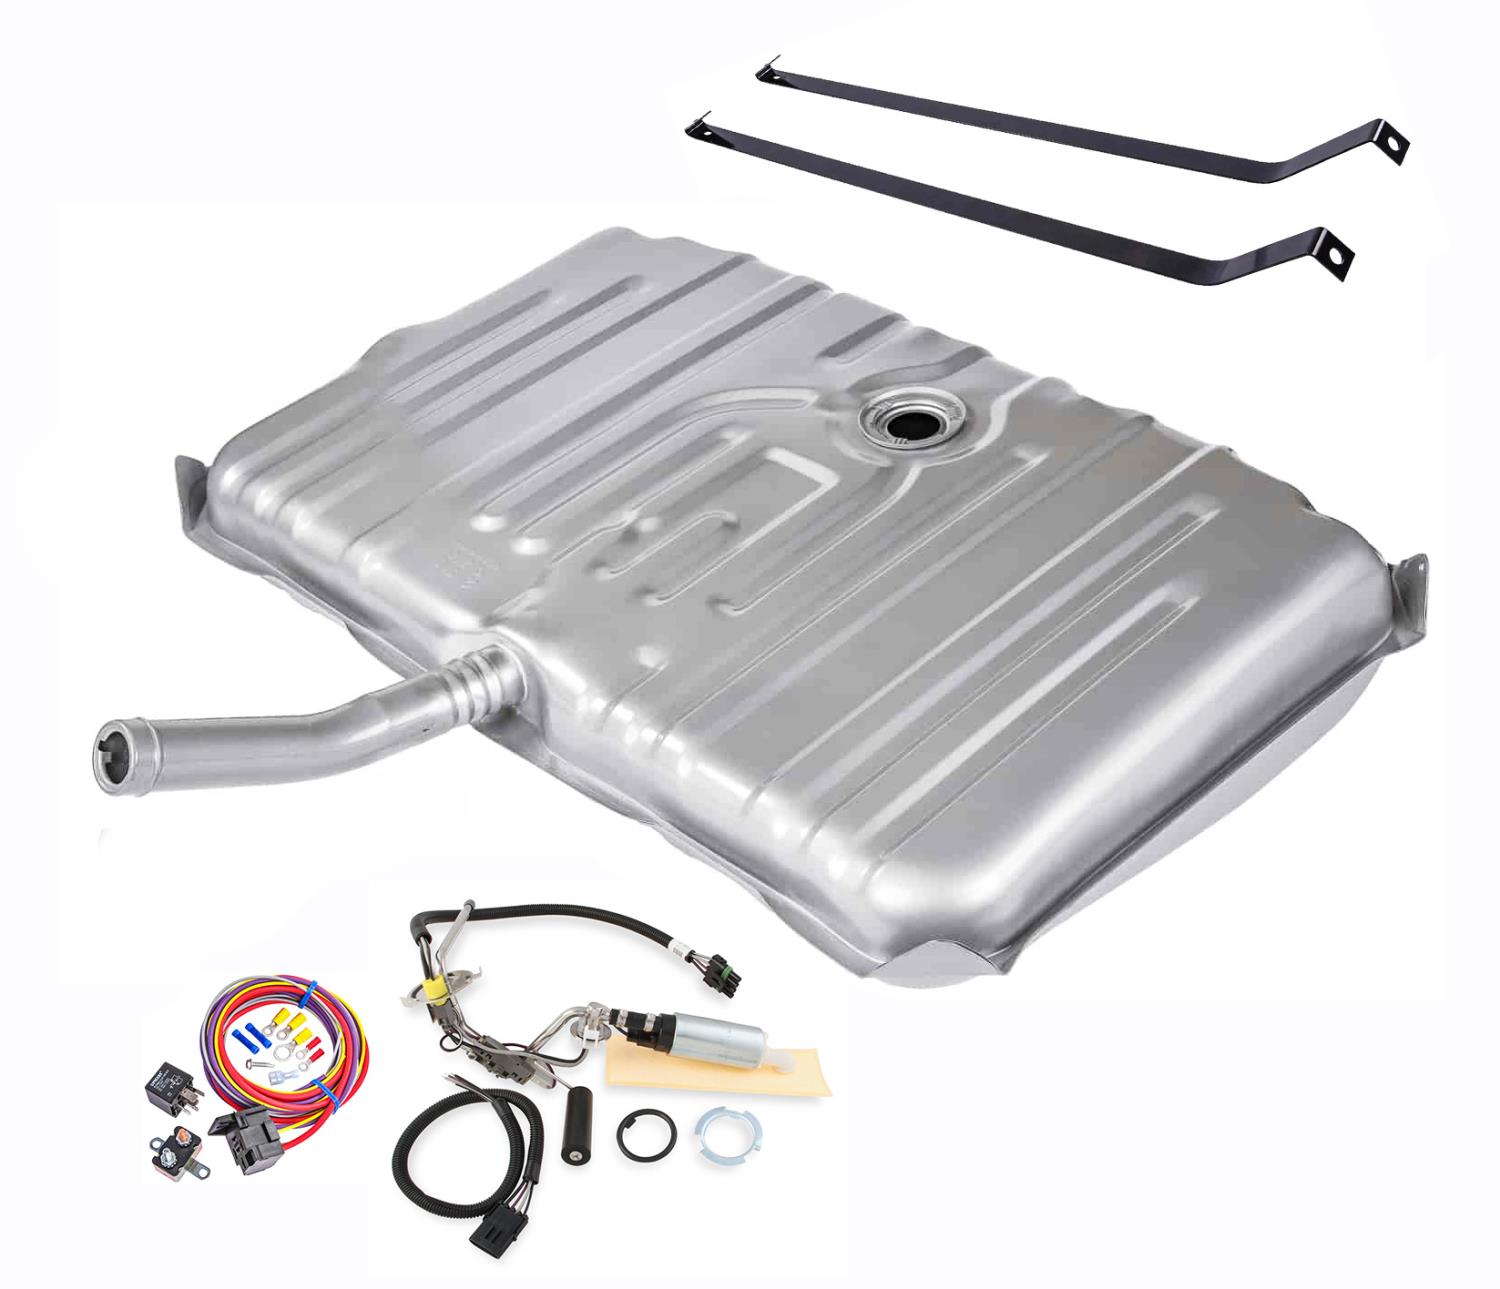 OEM-Style EFI Fuel Tank Module Kit with Tank 1970-1972 Chevrolet Chevelle